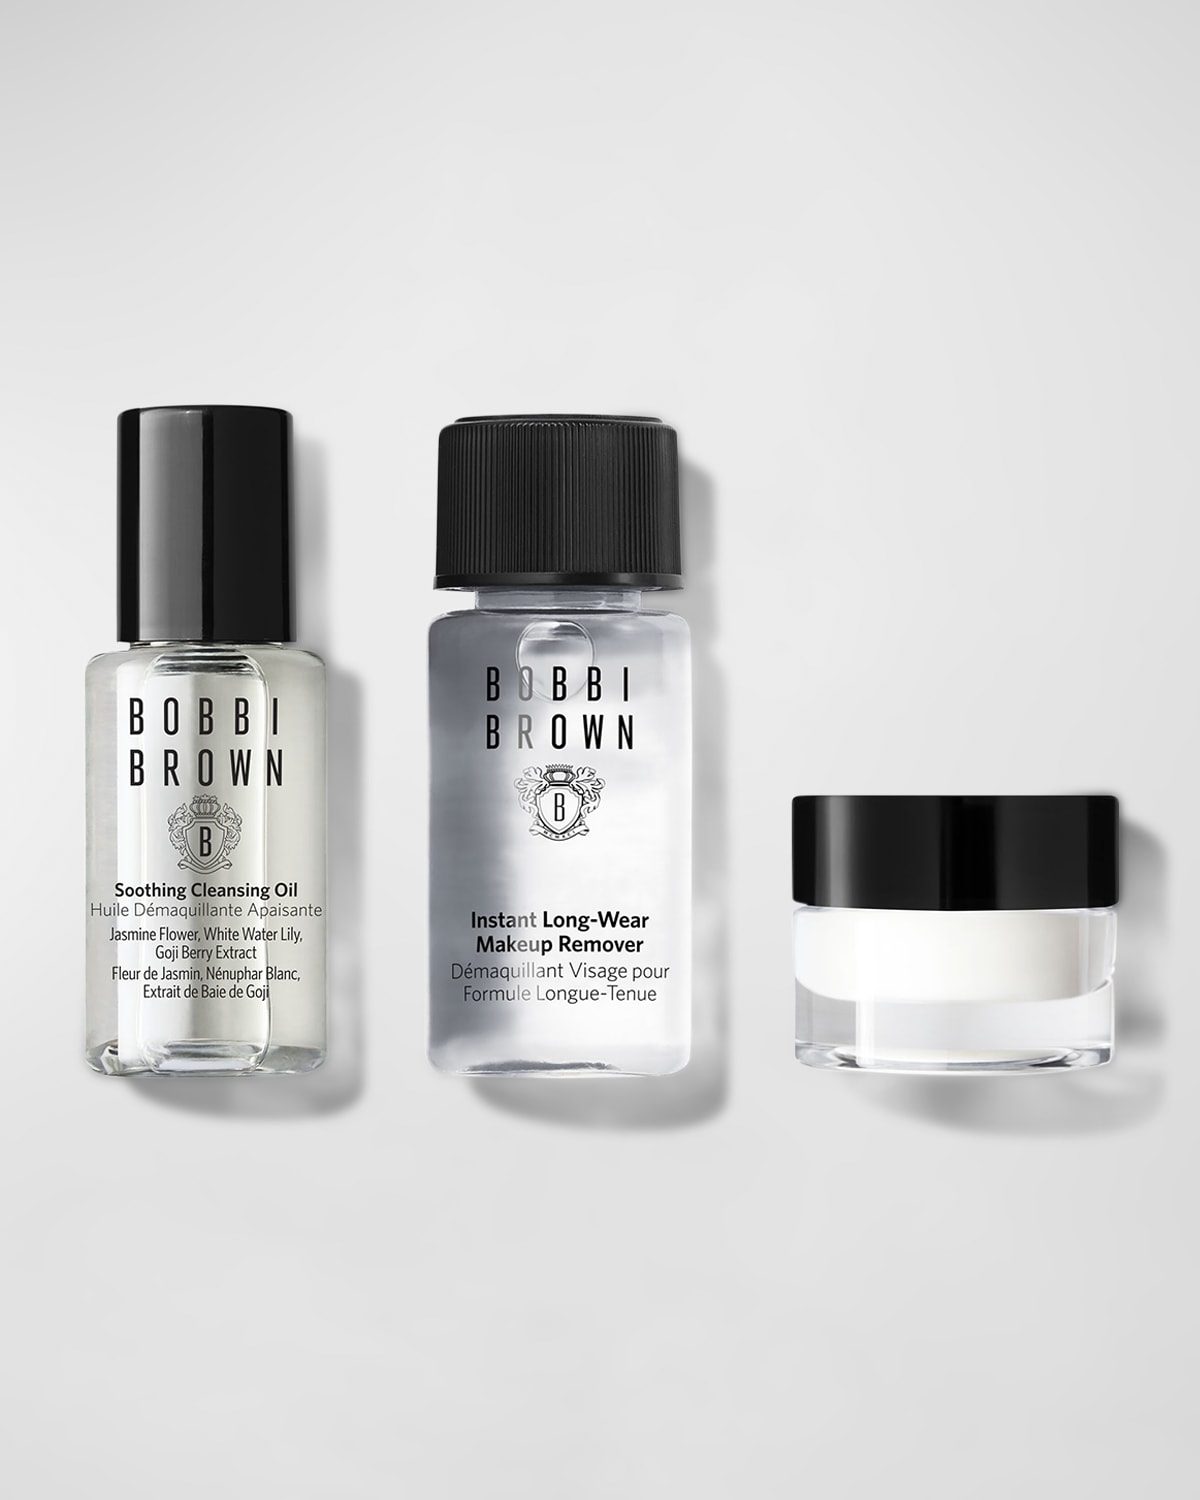 Makeup Takedown Set, Yours with any $75 Bobbi Brown Purchase